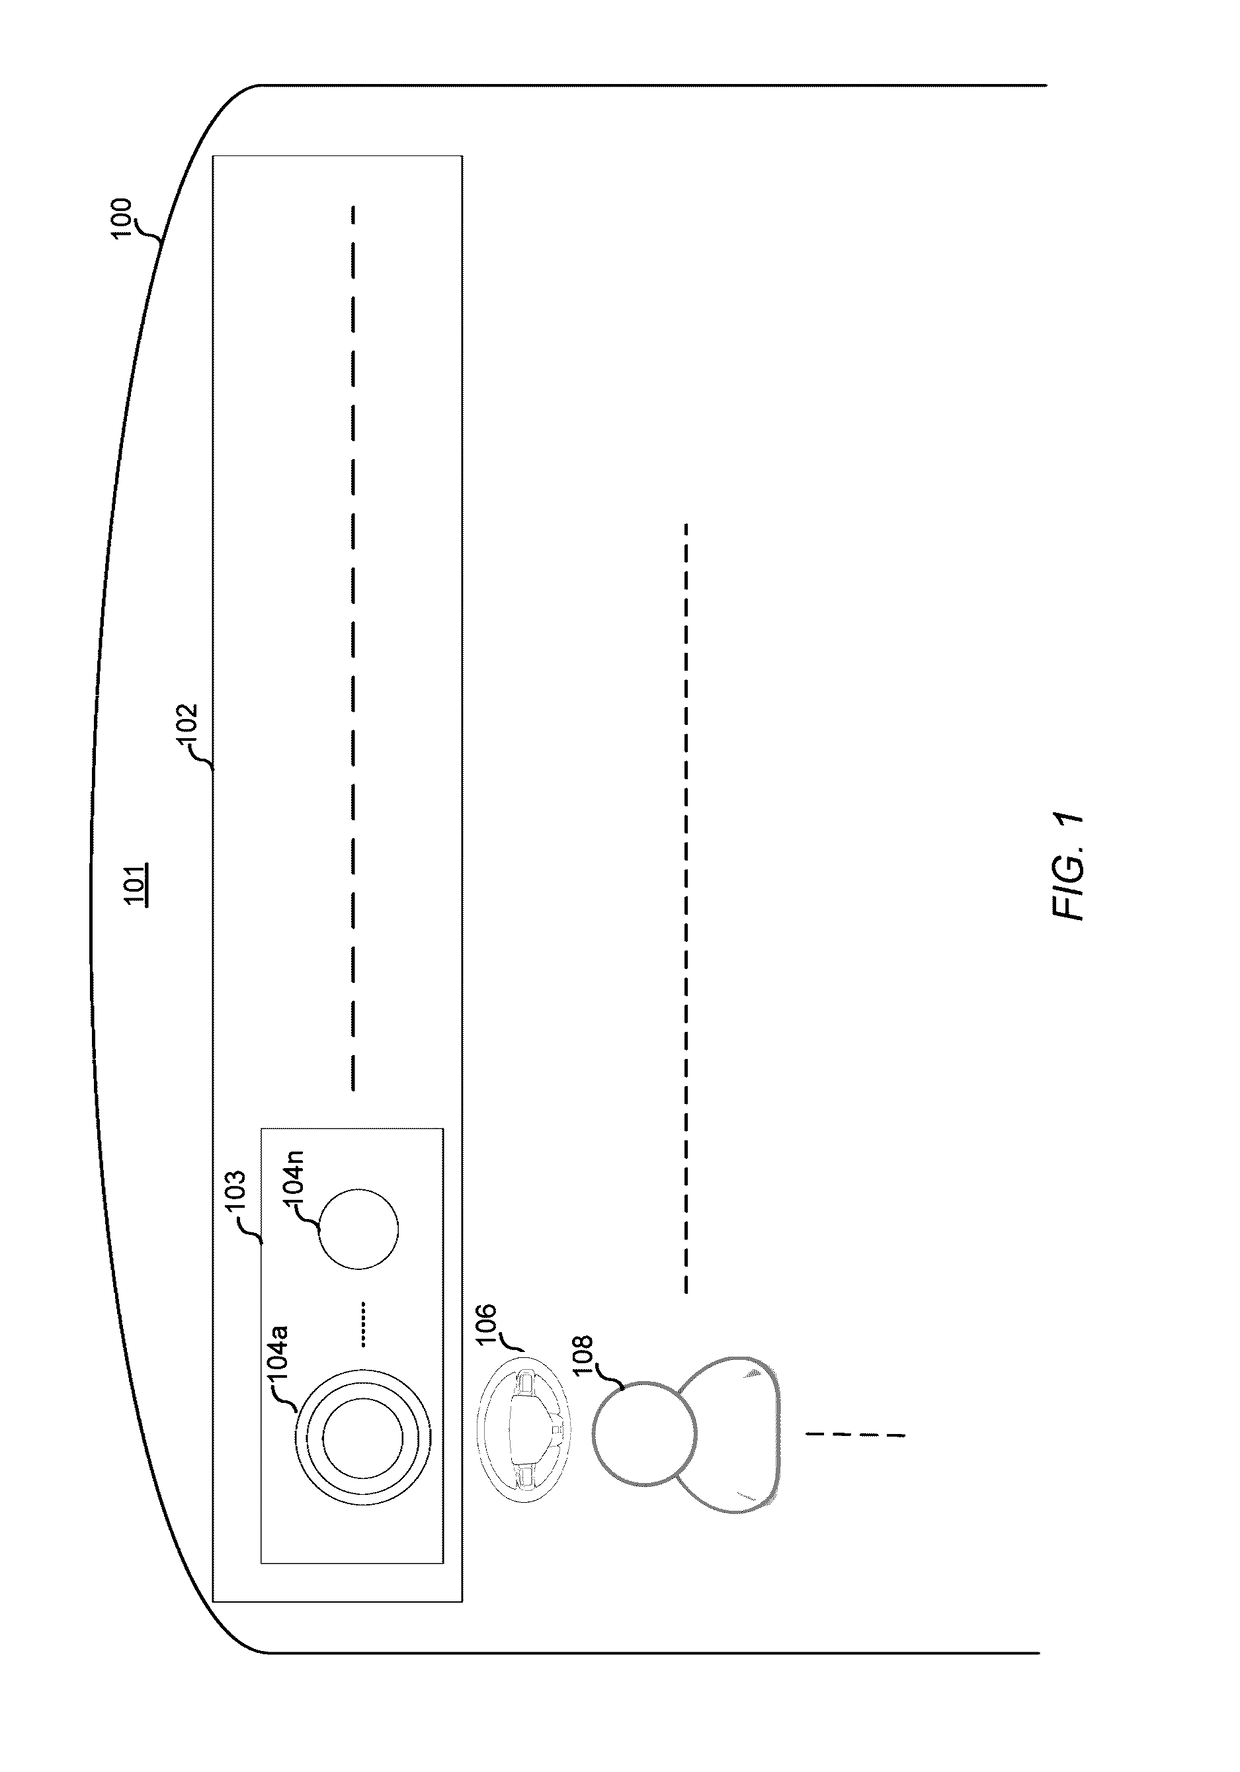 Clustered instrument panel in a transportation apparatus